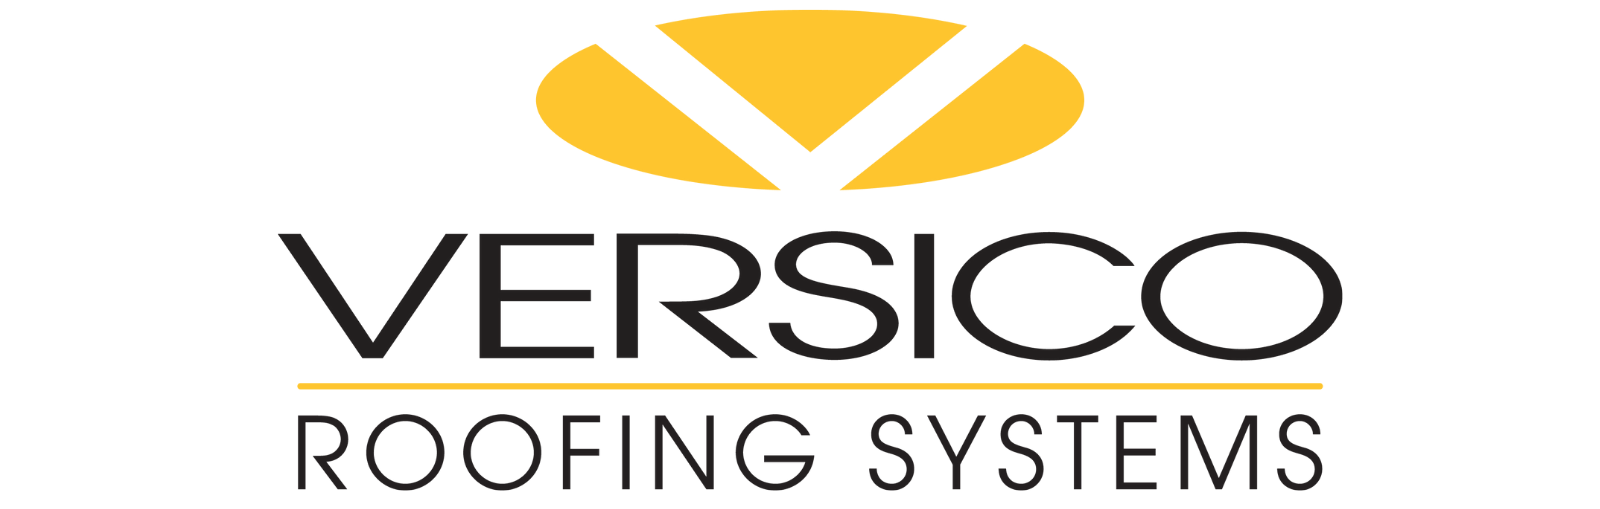 Versico Roofing Clearview Construction Preferred Contractor